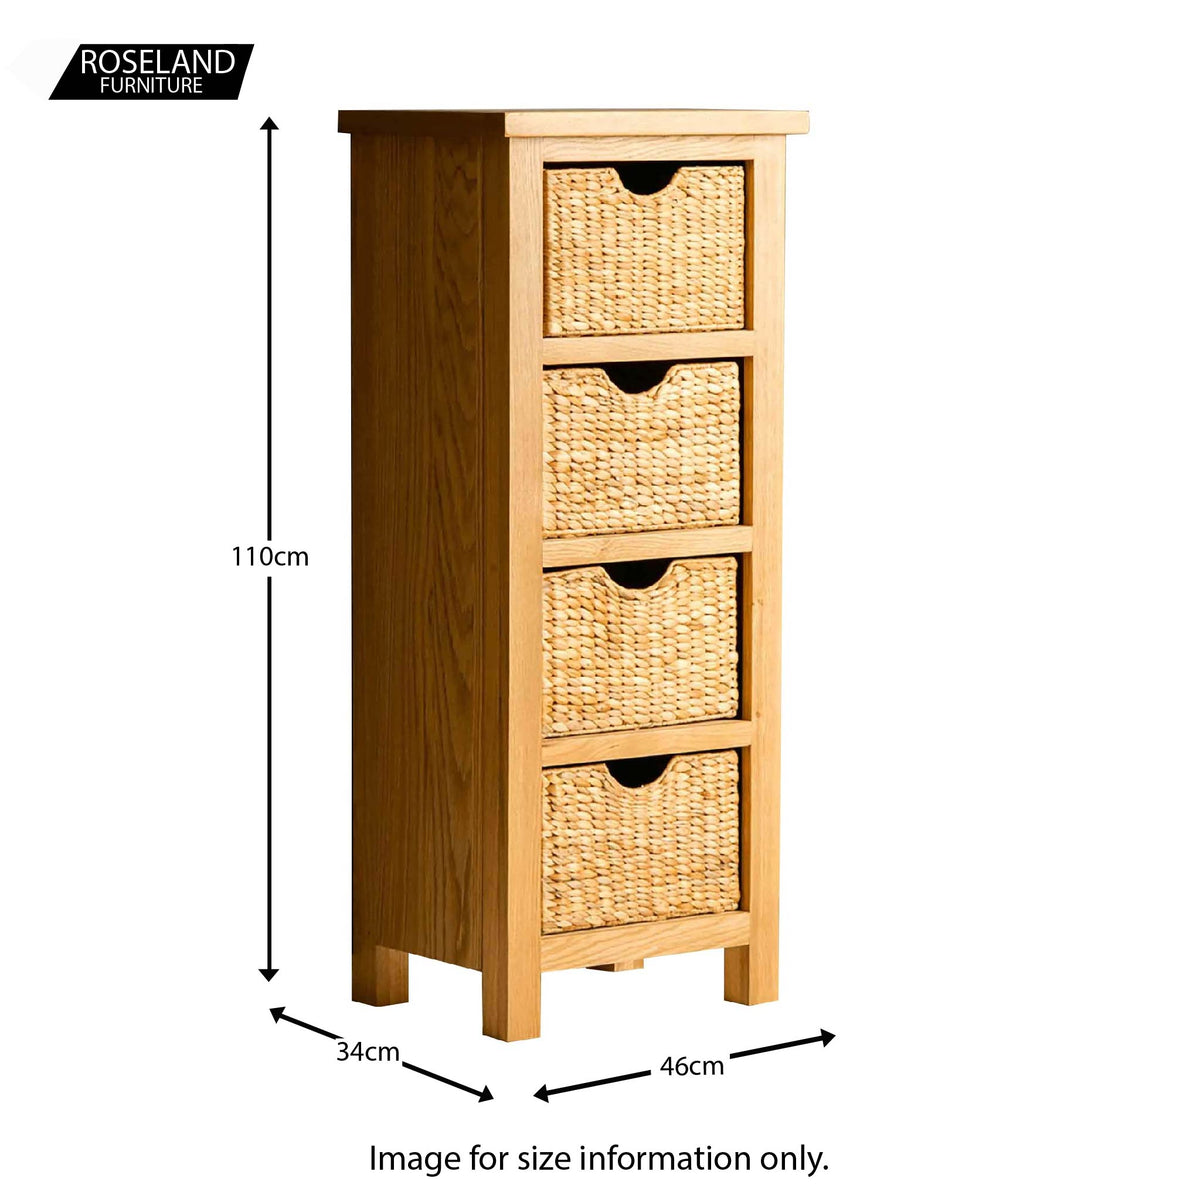 London Oak Tallboy with Baskets - Size guide